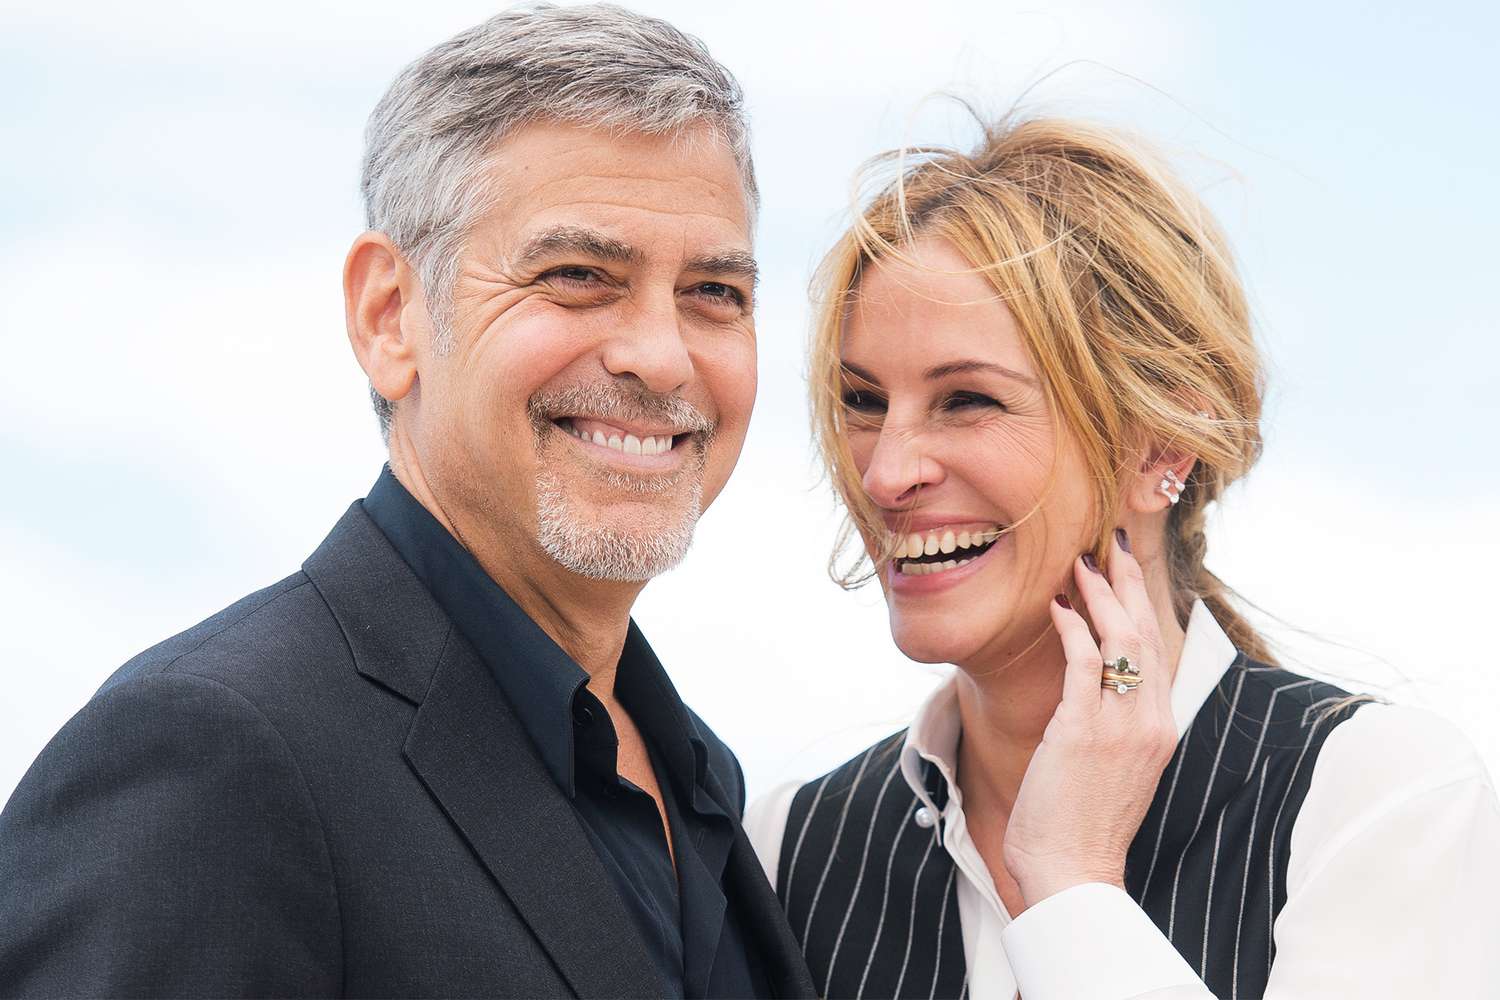 CANNES, FRANCE - MAY 12: George Clooney and Julia Roberts attend the "Money Monster" Photocall at the annual 69th Cannes Film Festival at Palais des Festivals on May 12, 2016 in Cannes, France. (Photo by Samir Hussein/WireImage)